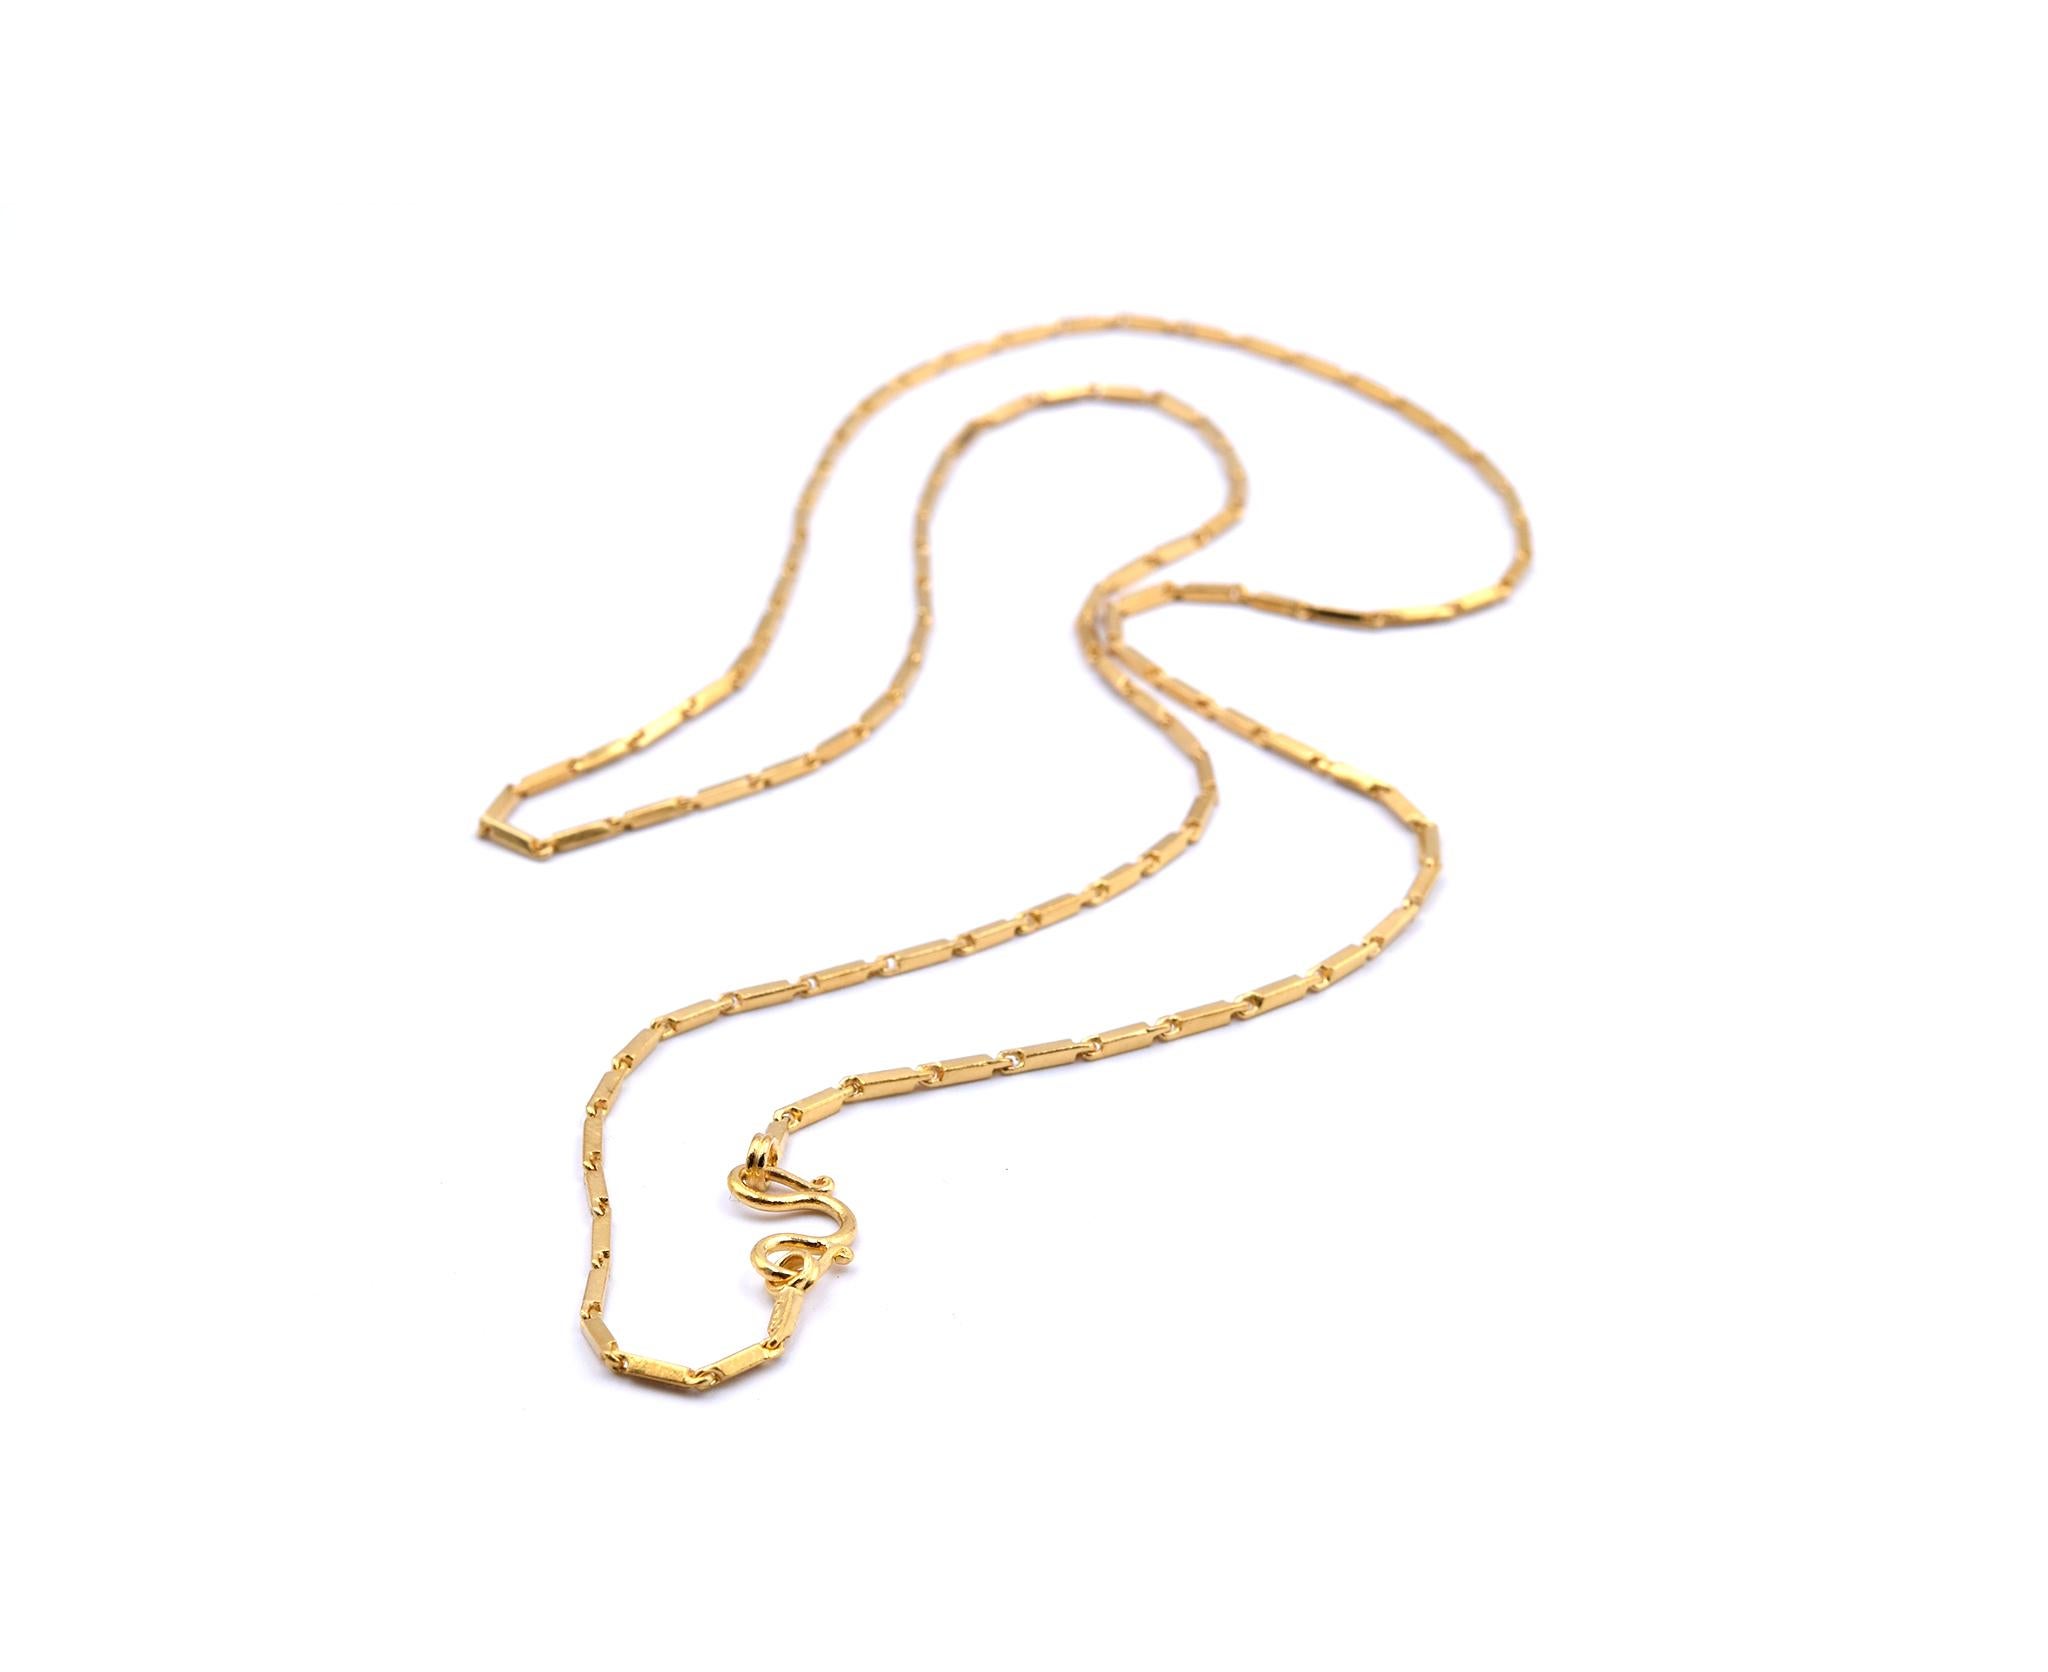 Designer: custom designed
Material: 24k yellow gold
Dimensions: necklace is 25-inches long and measures 1.38mm wide
Weight: 17.21 grams
